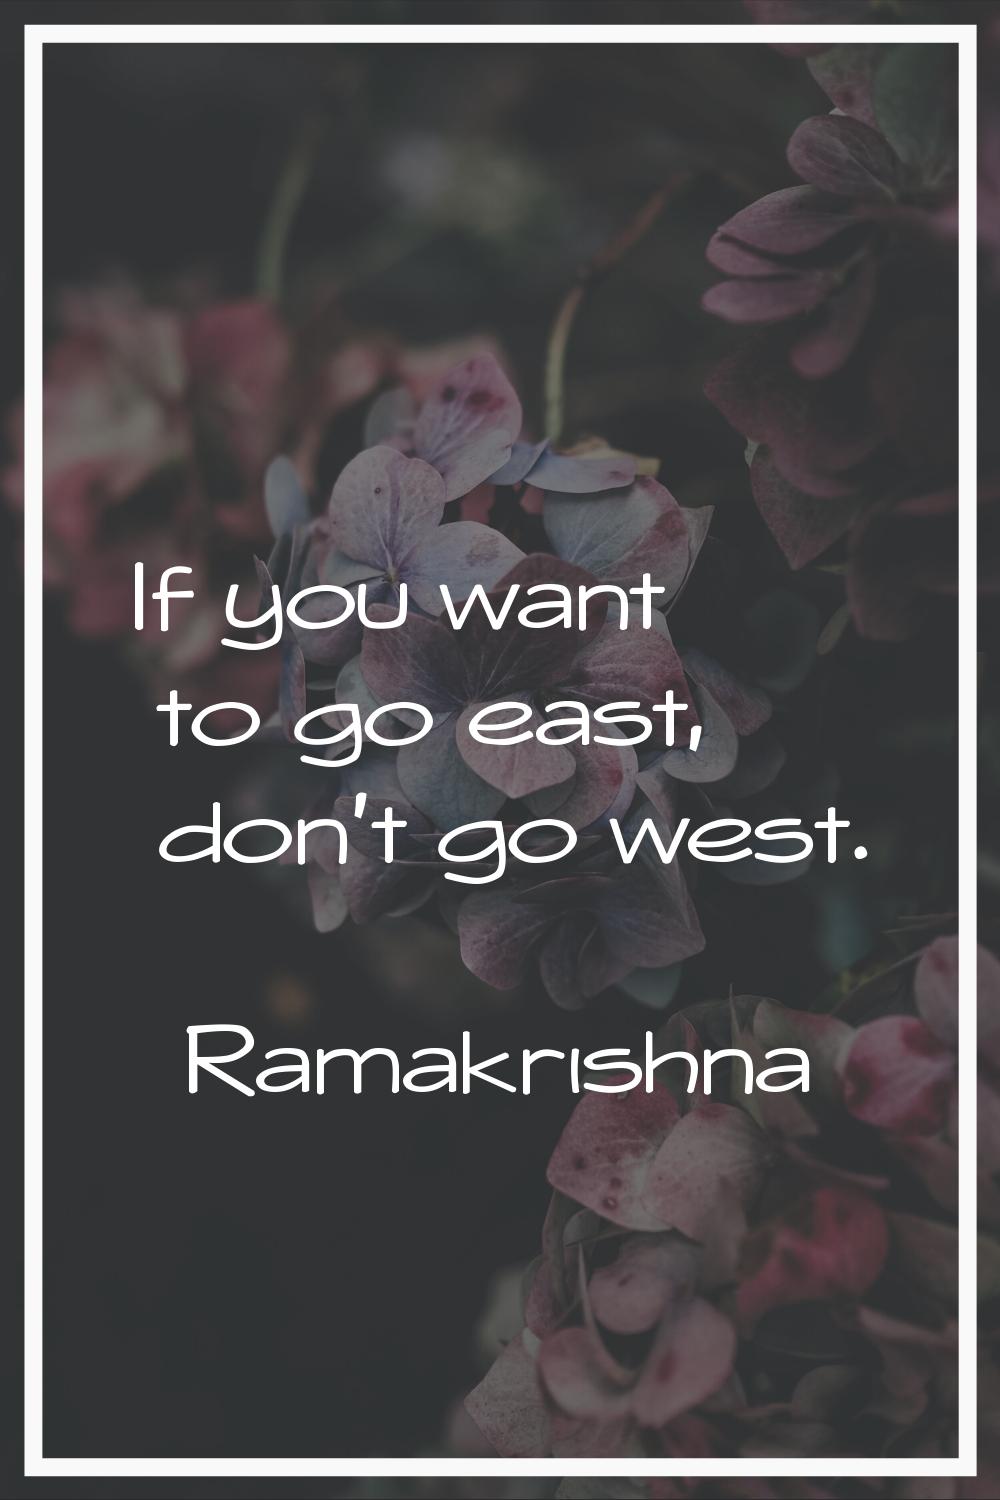 If you want to go east, don't go west.